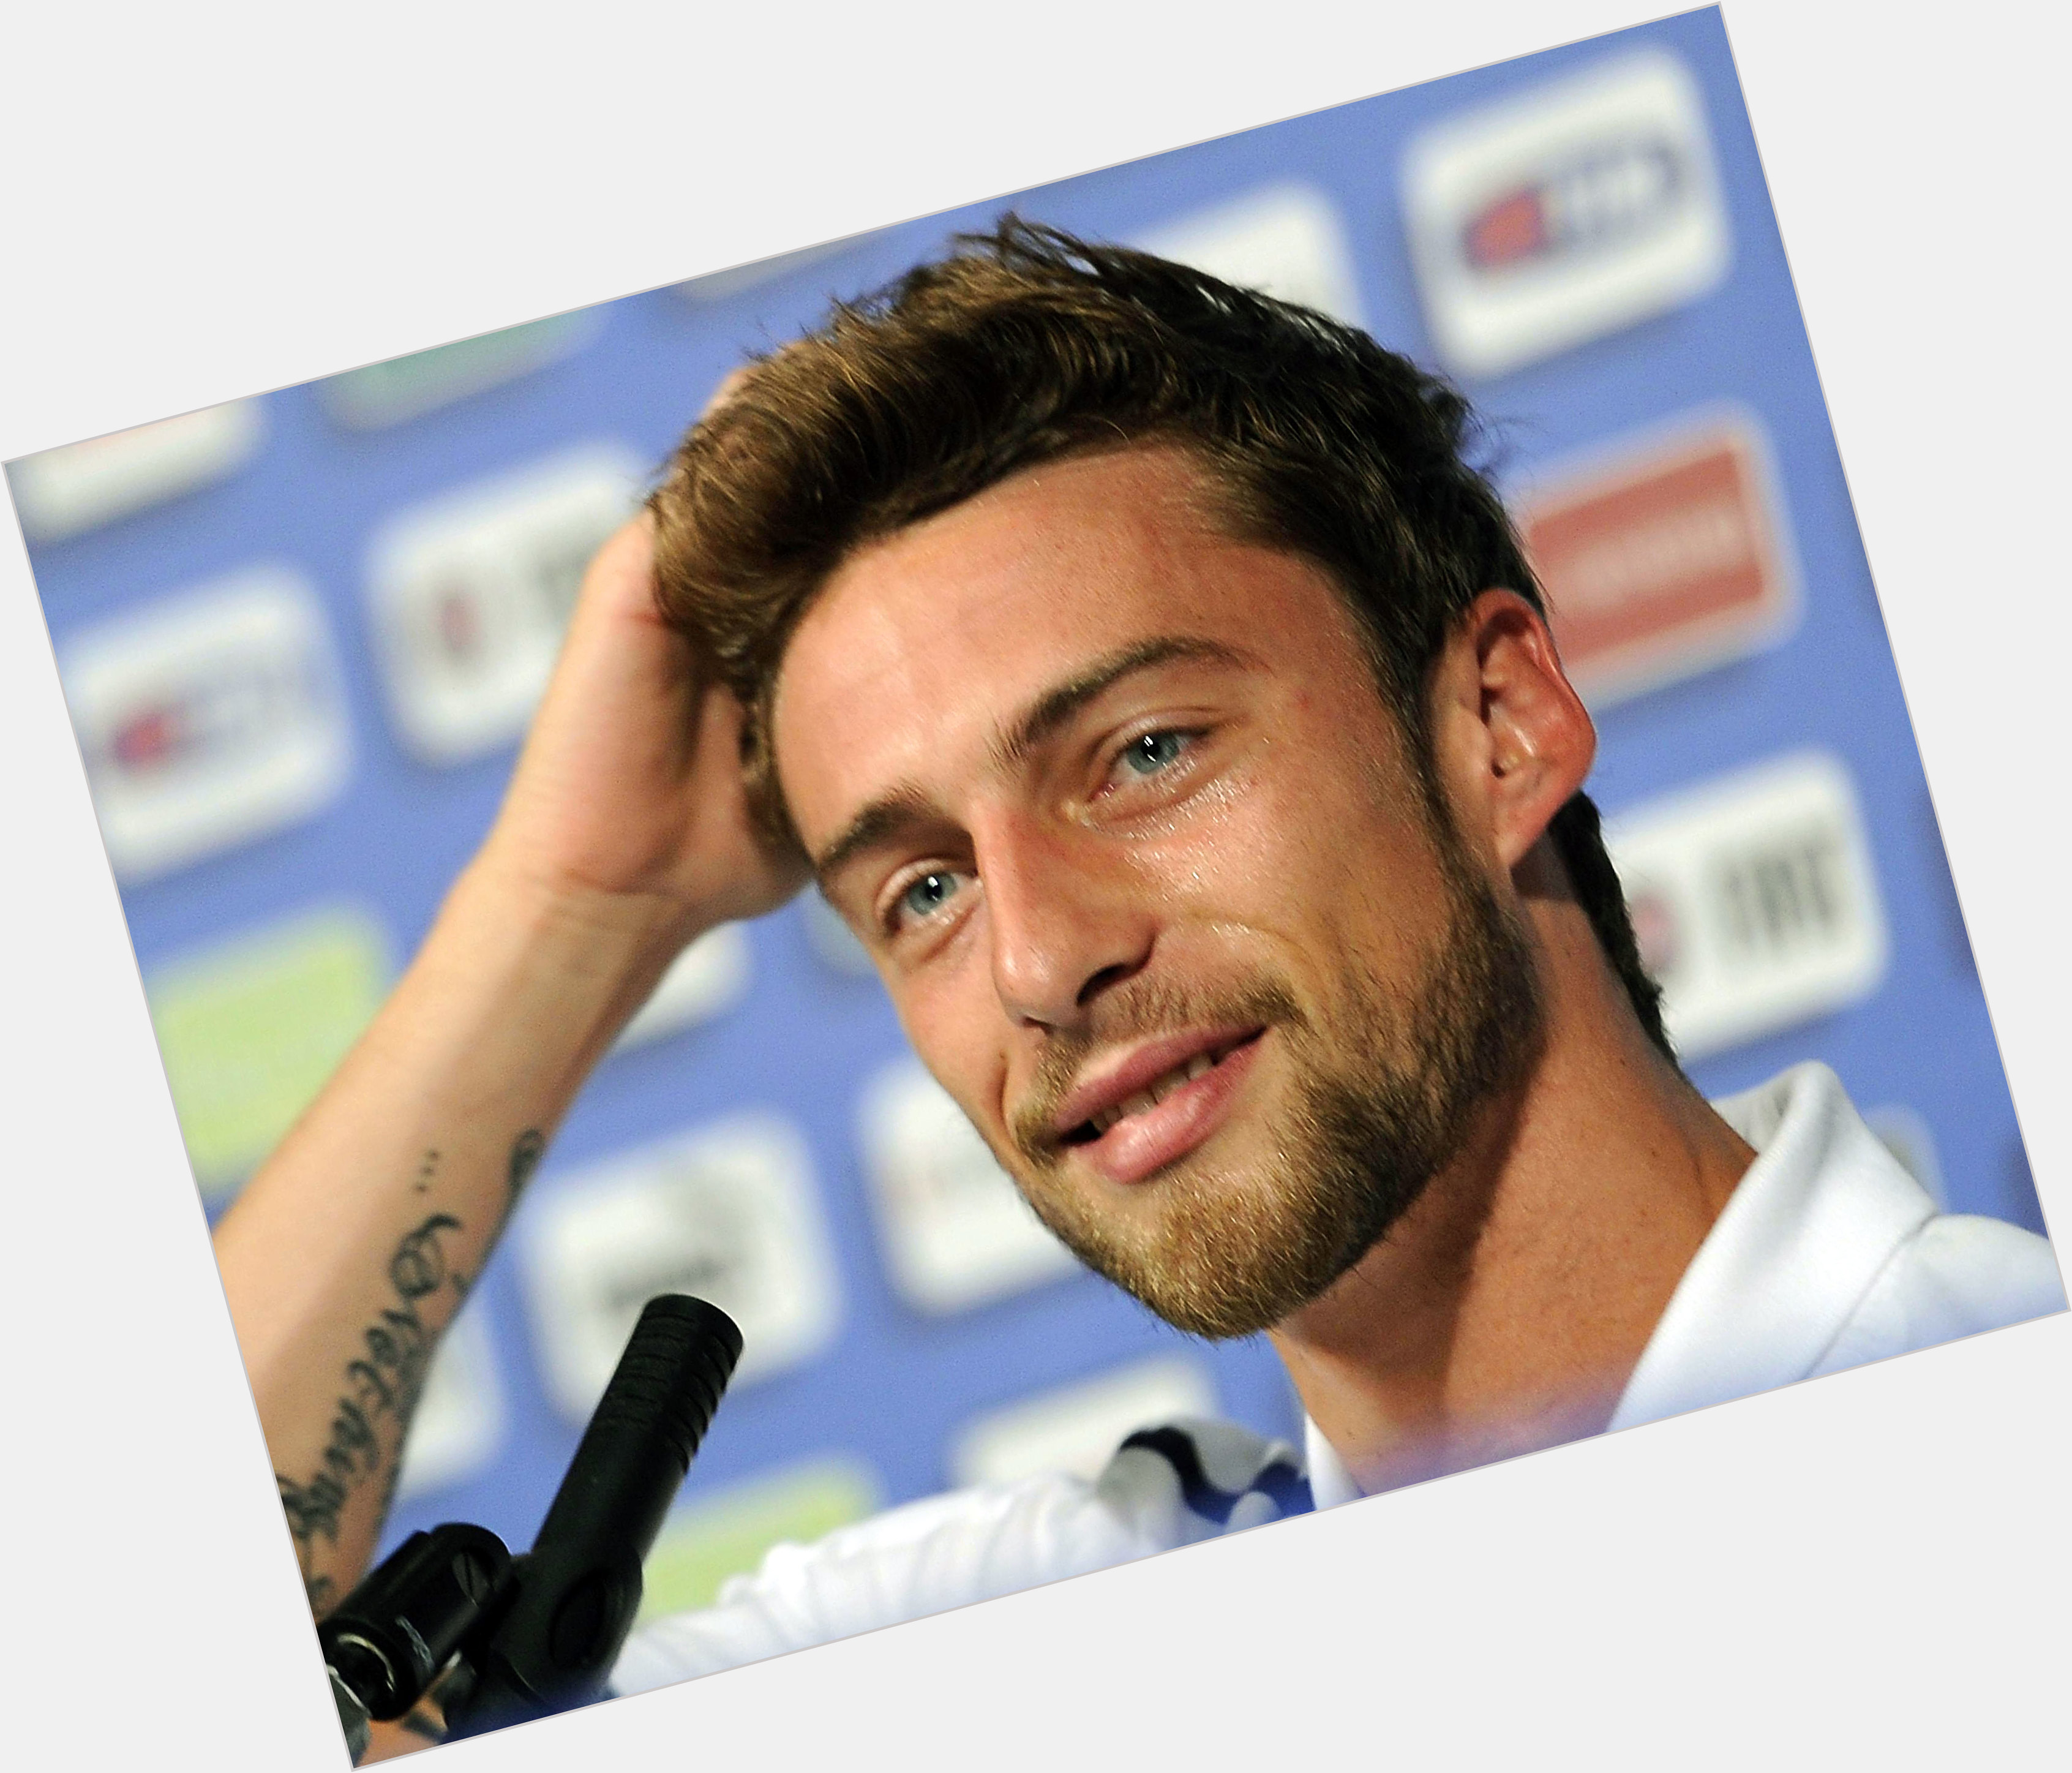 Http://fanpagepress.net/m/C/Claudio Marchisio Marriage 3